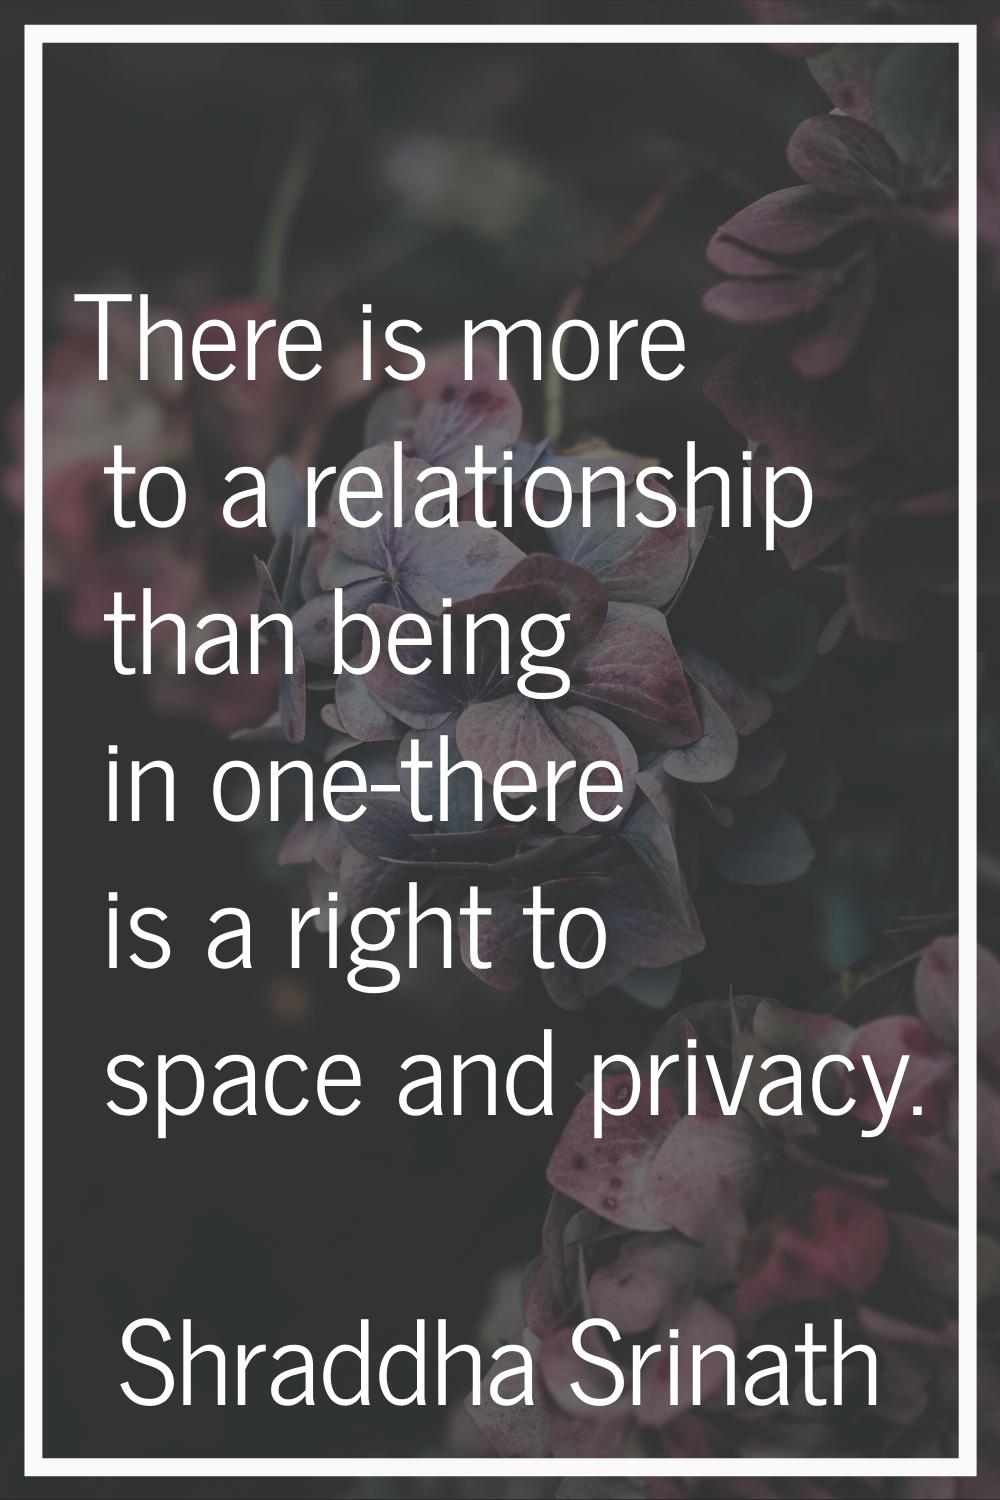 There is more to a relationship than being in one-there is a right to space and privacy.